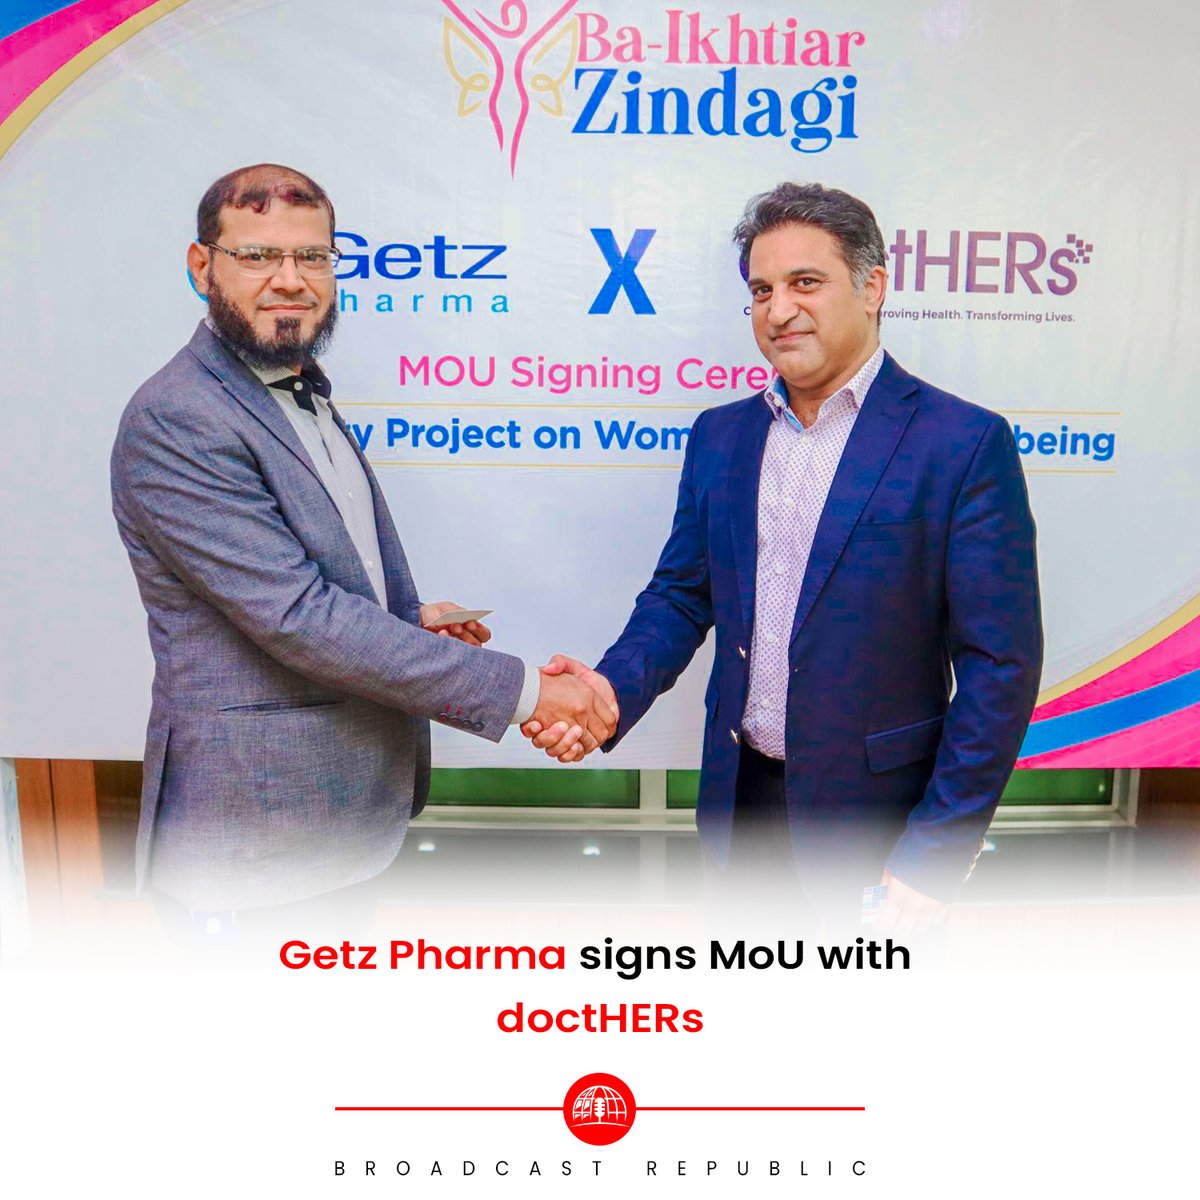 Getz Pharma has signed a Memorandum of Understanding (MoU) with doctHERs, an integrated digital healthcare platform providing an end-to-end ‘Continuity of Health Care’ solution to improve patients’ lives. 
#GetzPharma #doctHERs 
🌐 Read More: Broadcastrepublic.com